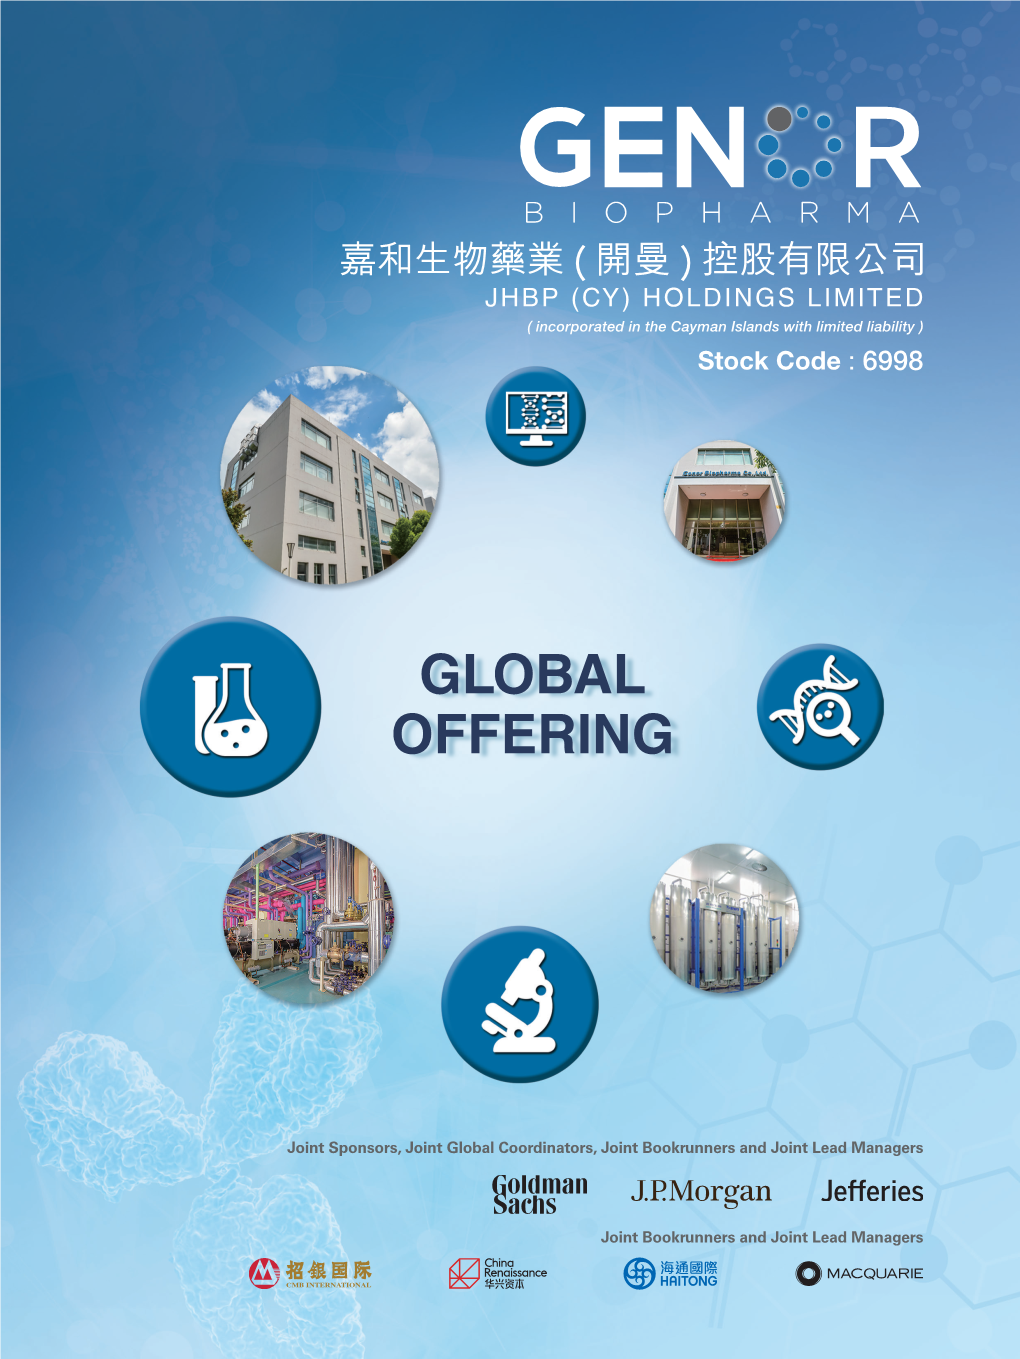 Global Offering